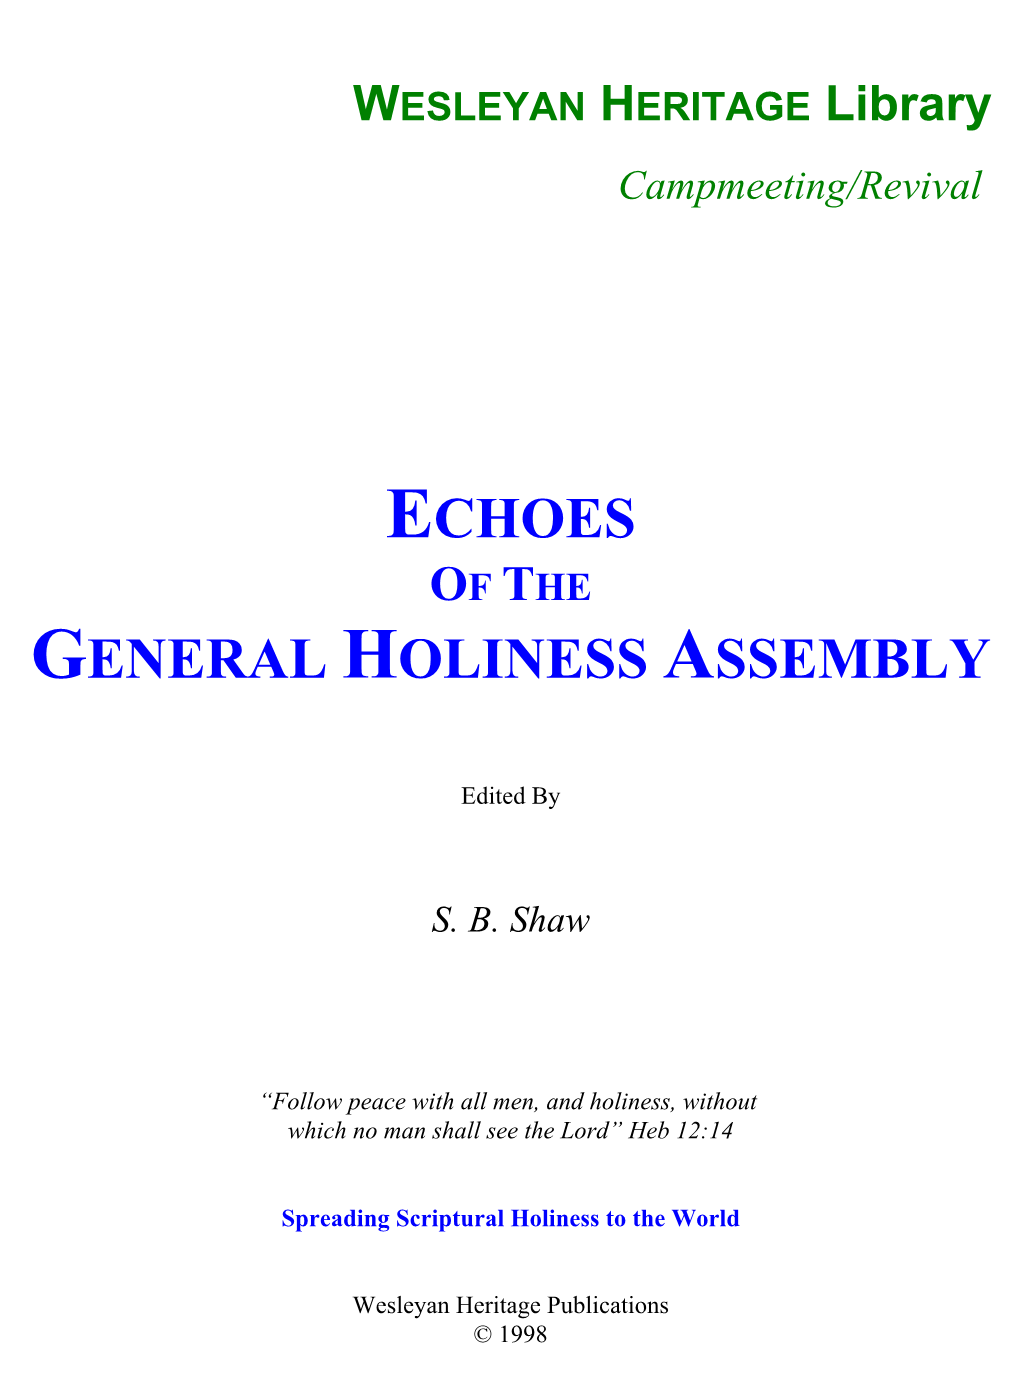 Echoes of the General Holiness Assembly